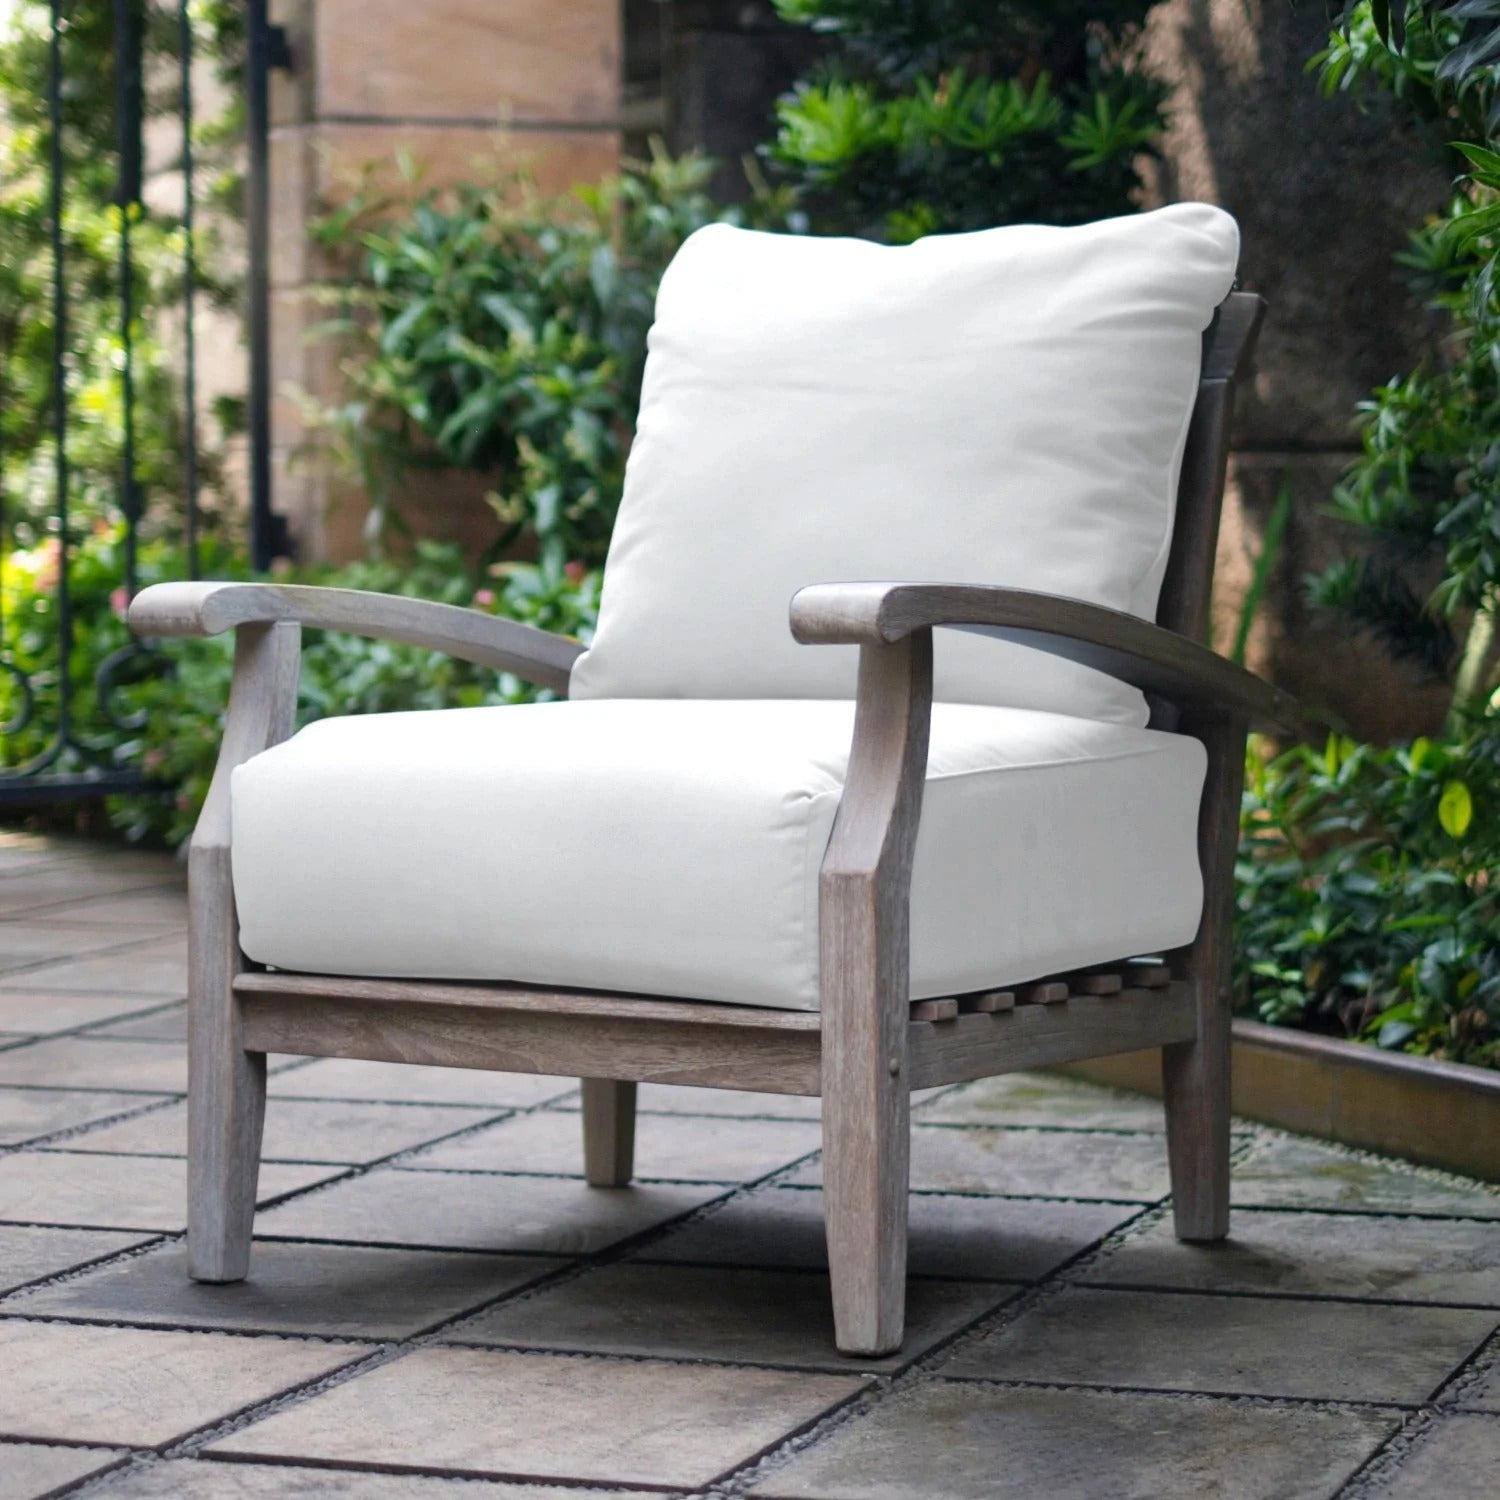 Caterina Weathered Teak Wood Outdoor Lounge Chair with Off White Cushion